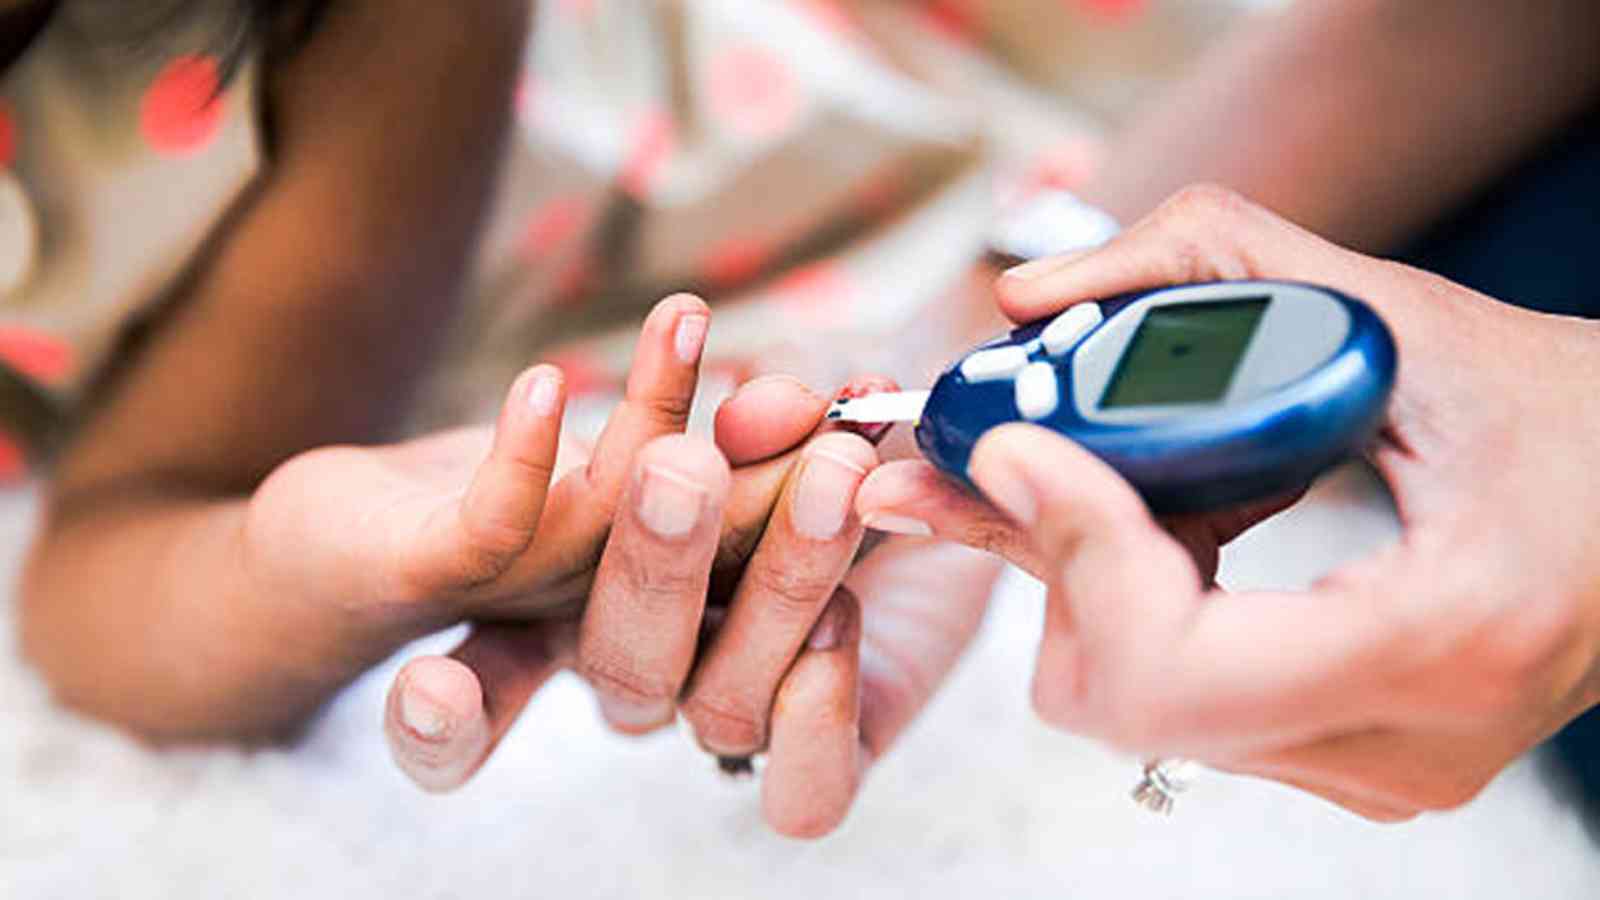 American Diabetes Alert Day 2023: Date, History, Facts about Diabetes